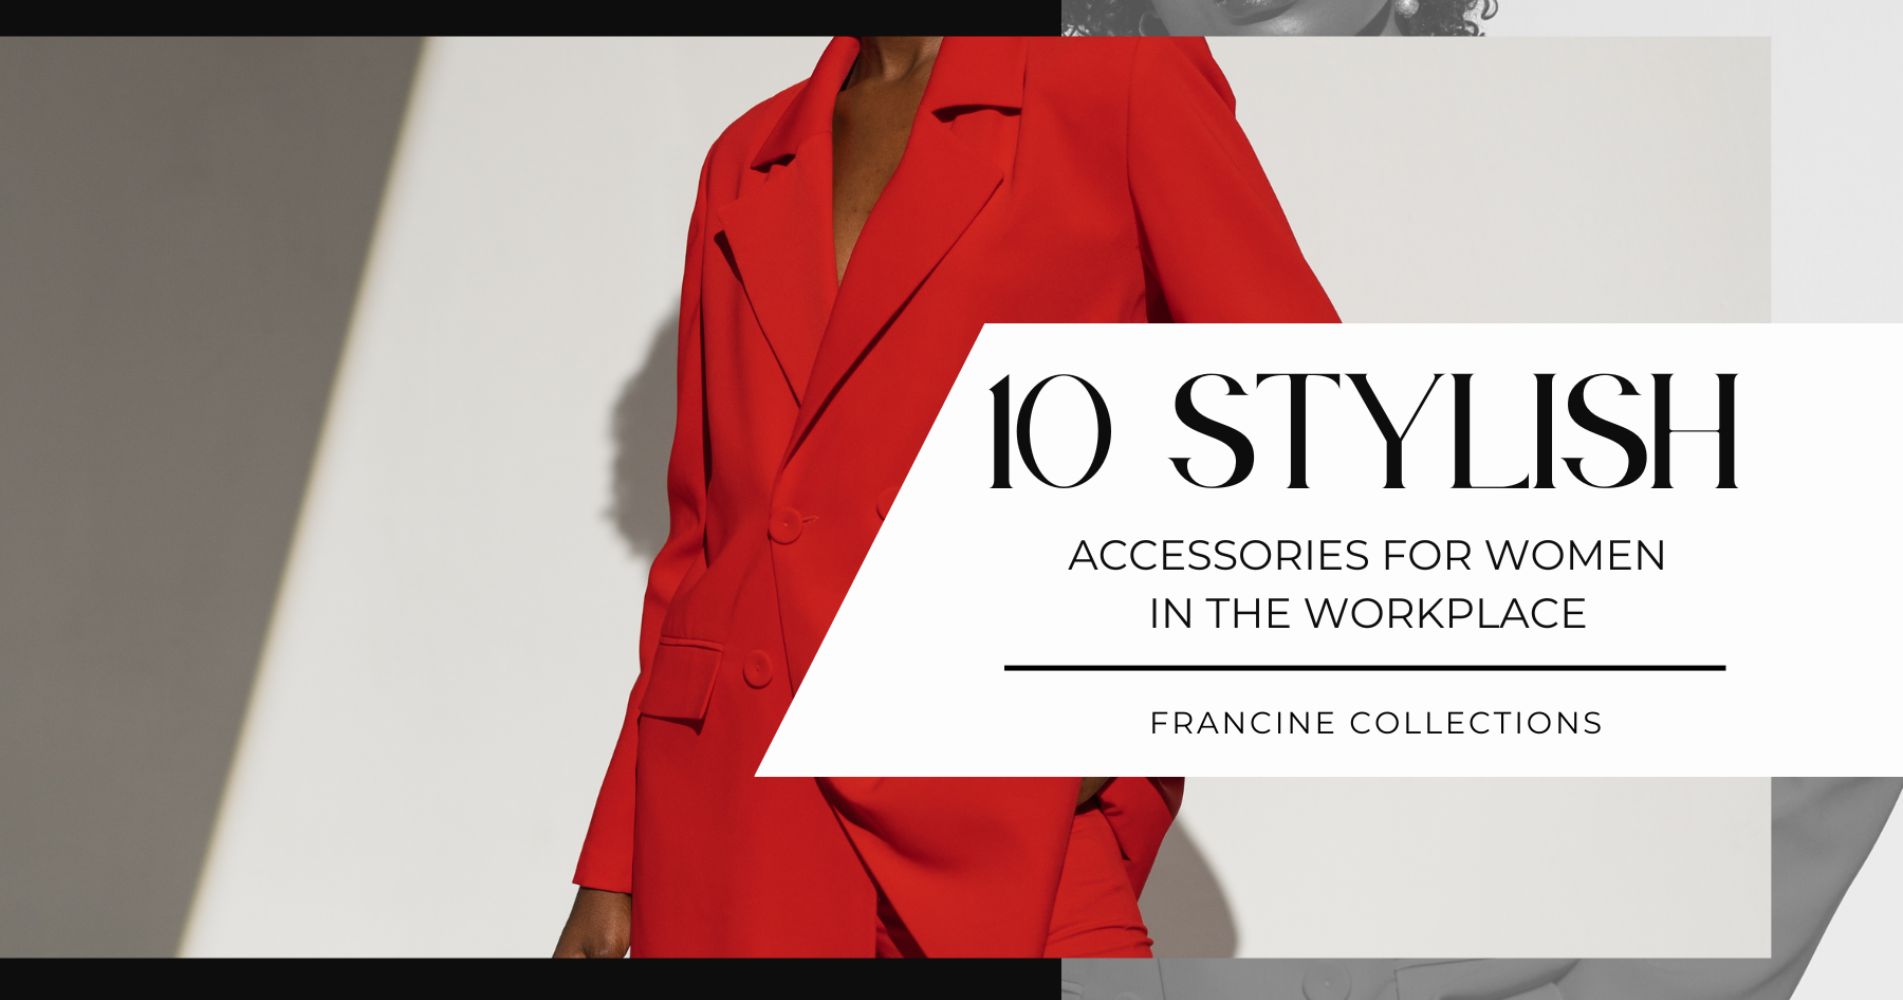 http://www.francinecollections.com/cdn/shop/articles/FrancineCollections-188675-Accessories-Women-Workplace-Image1.jpg?v=1677086518